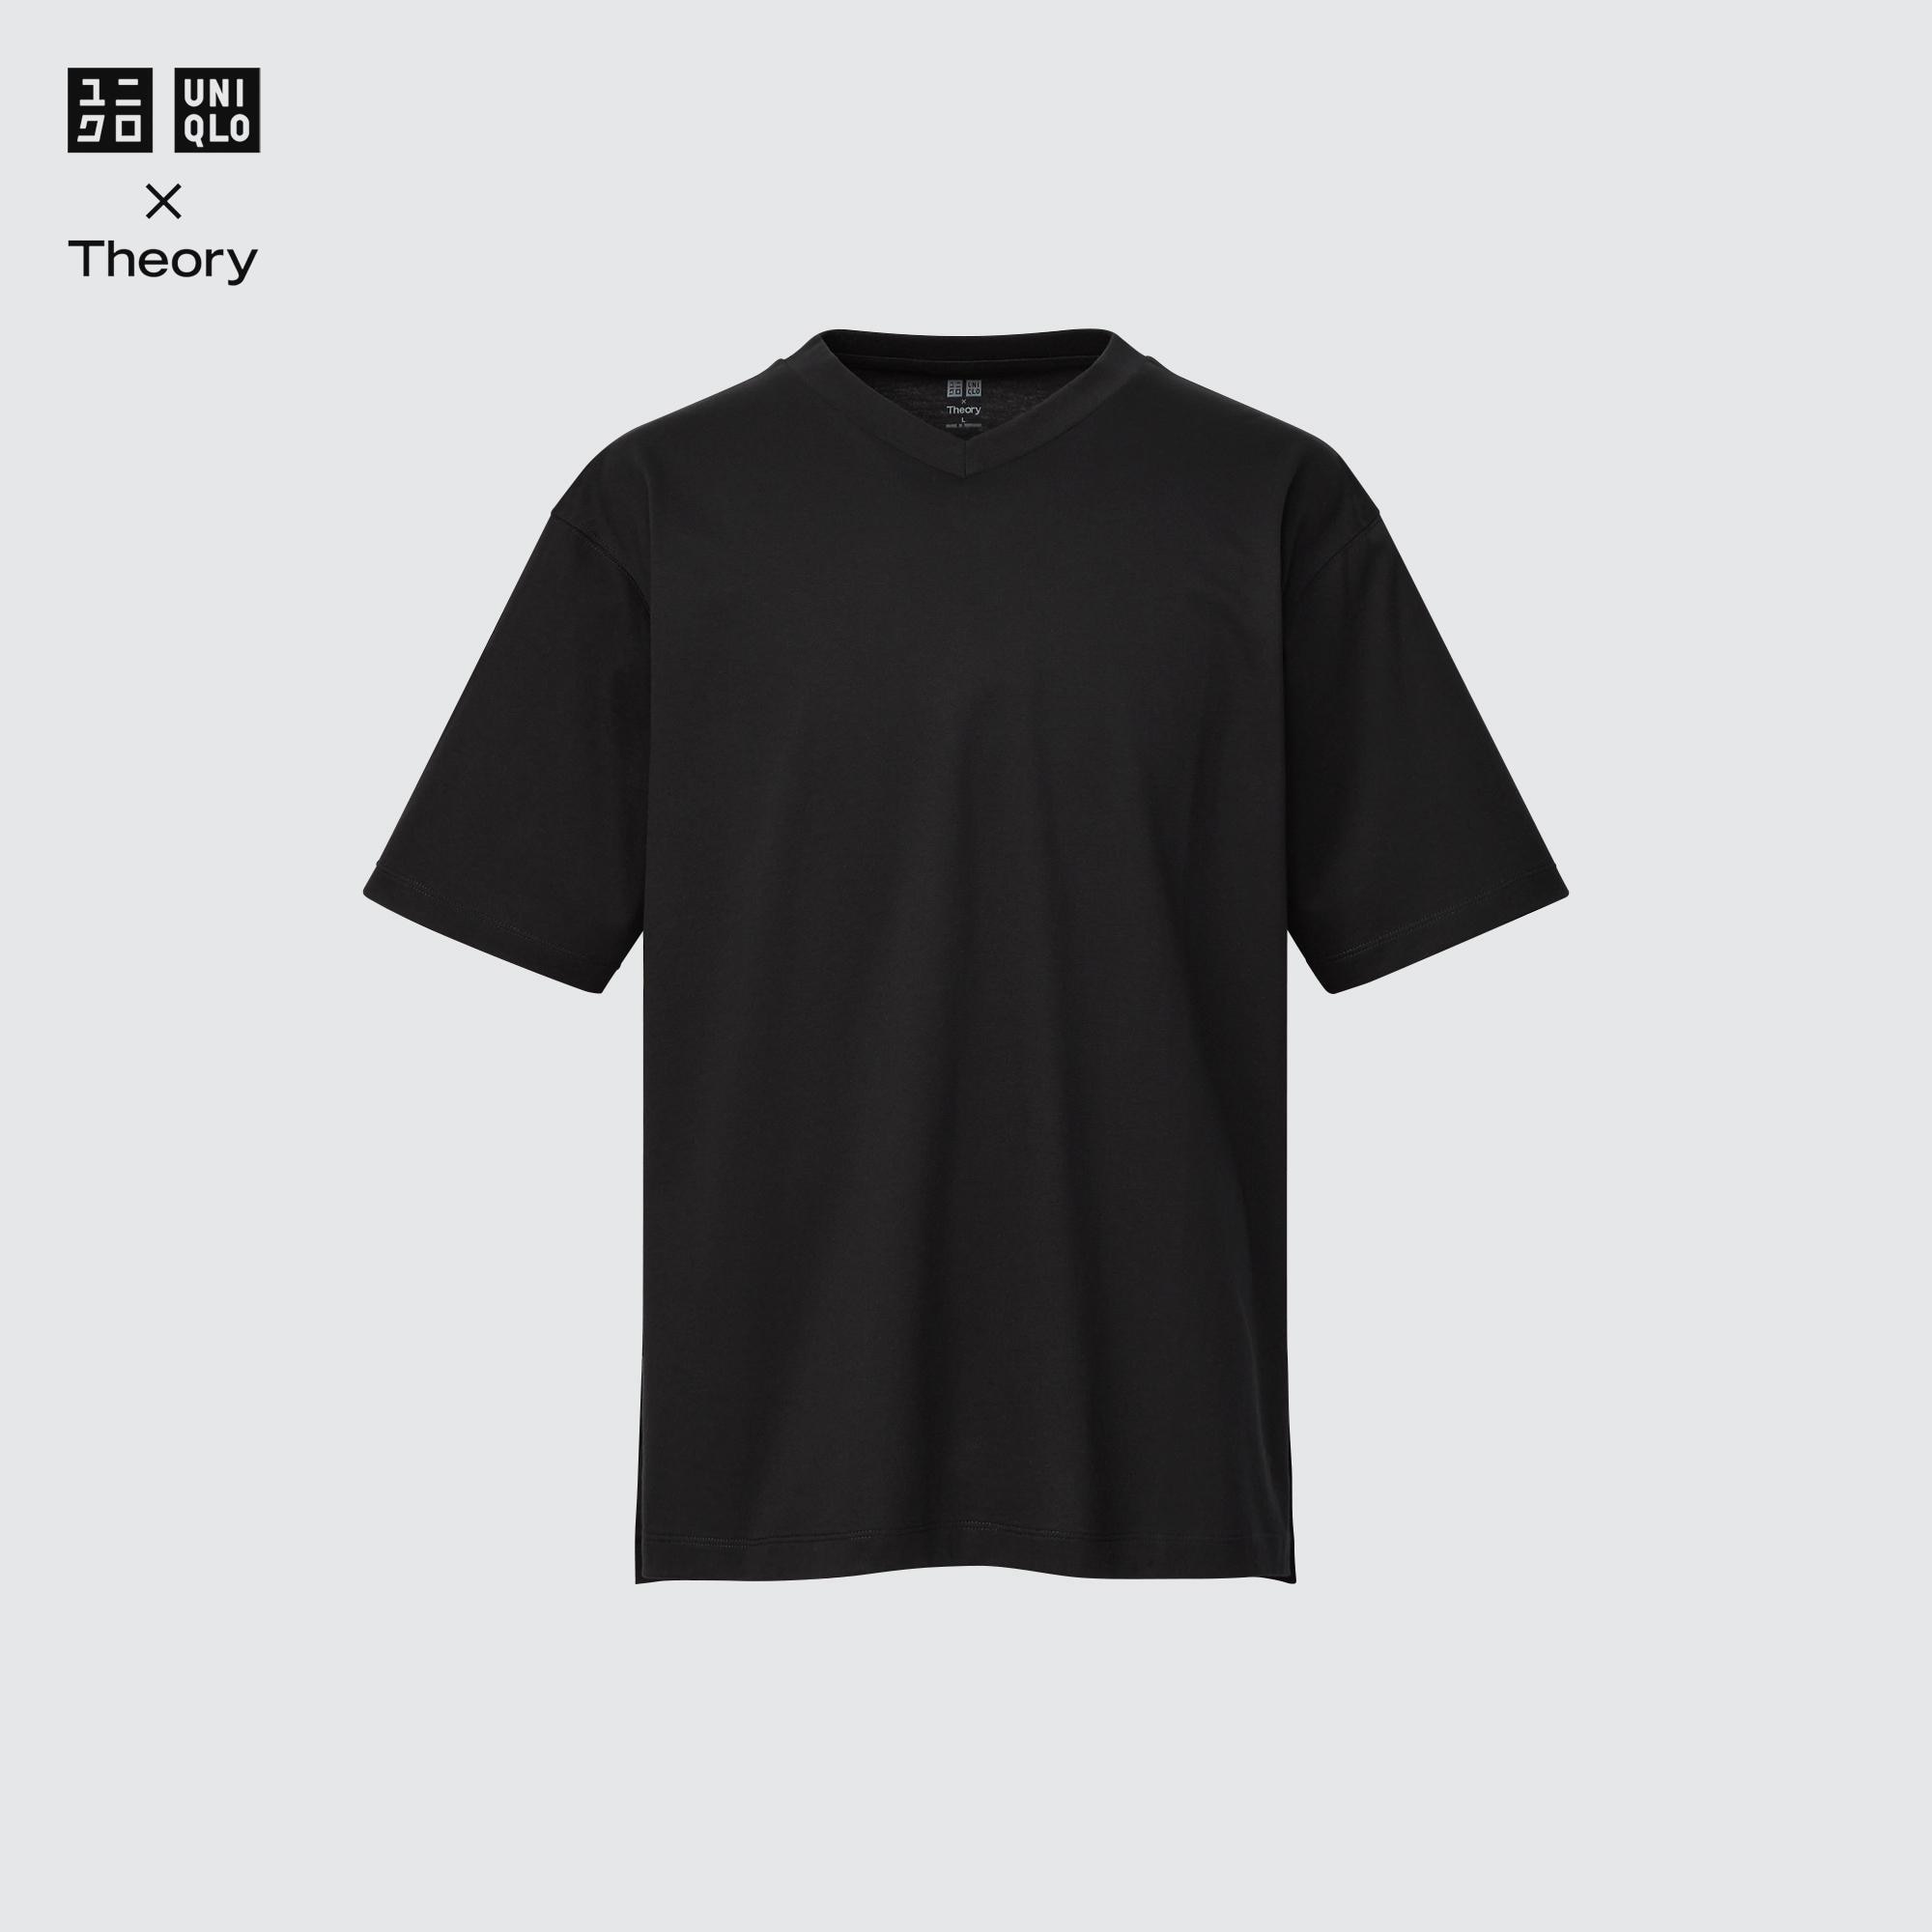 Relaxed Fit V-Neck Short-Sleeve T-Shirt (Theory) | UNIQLO US